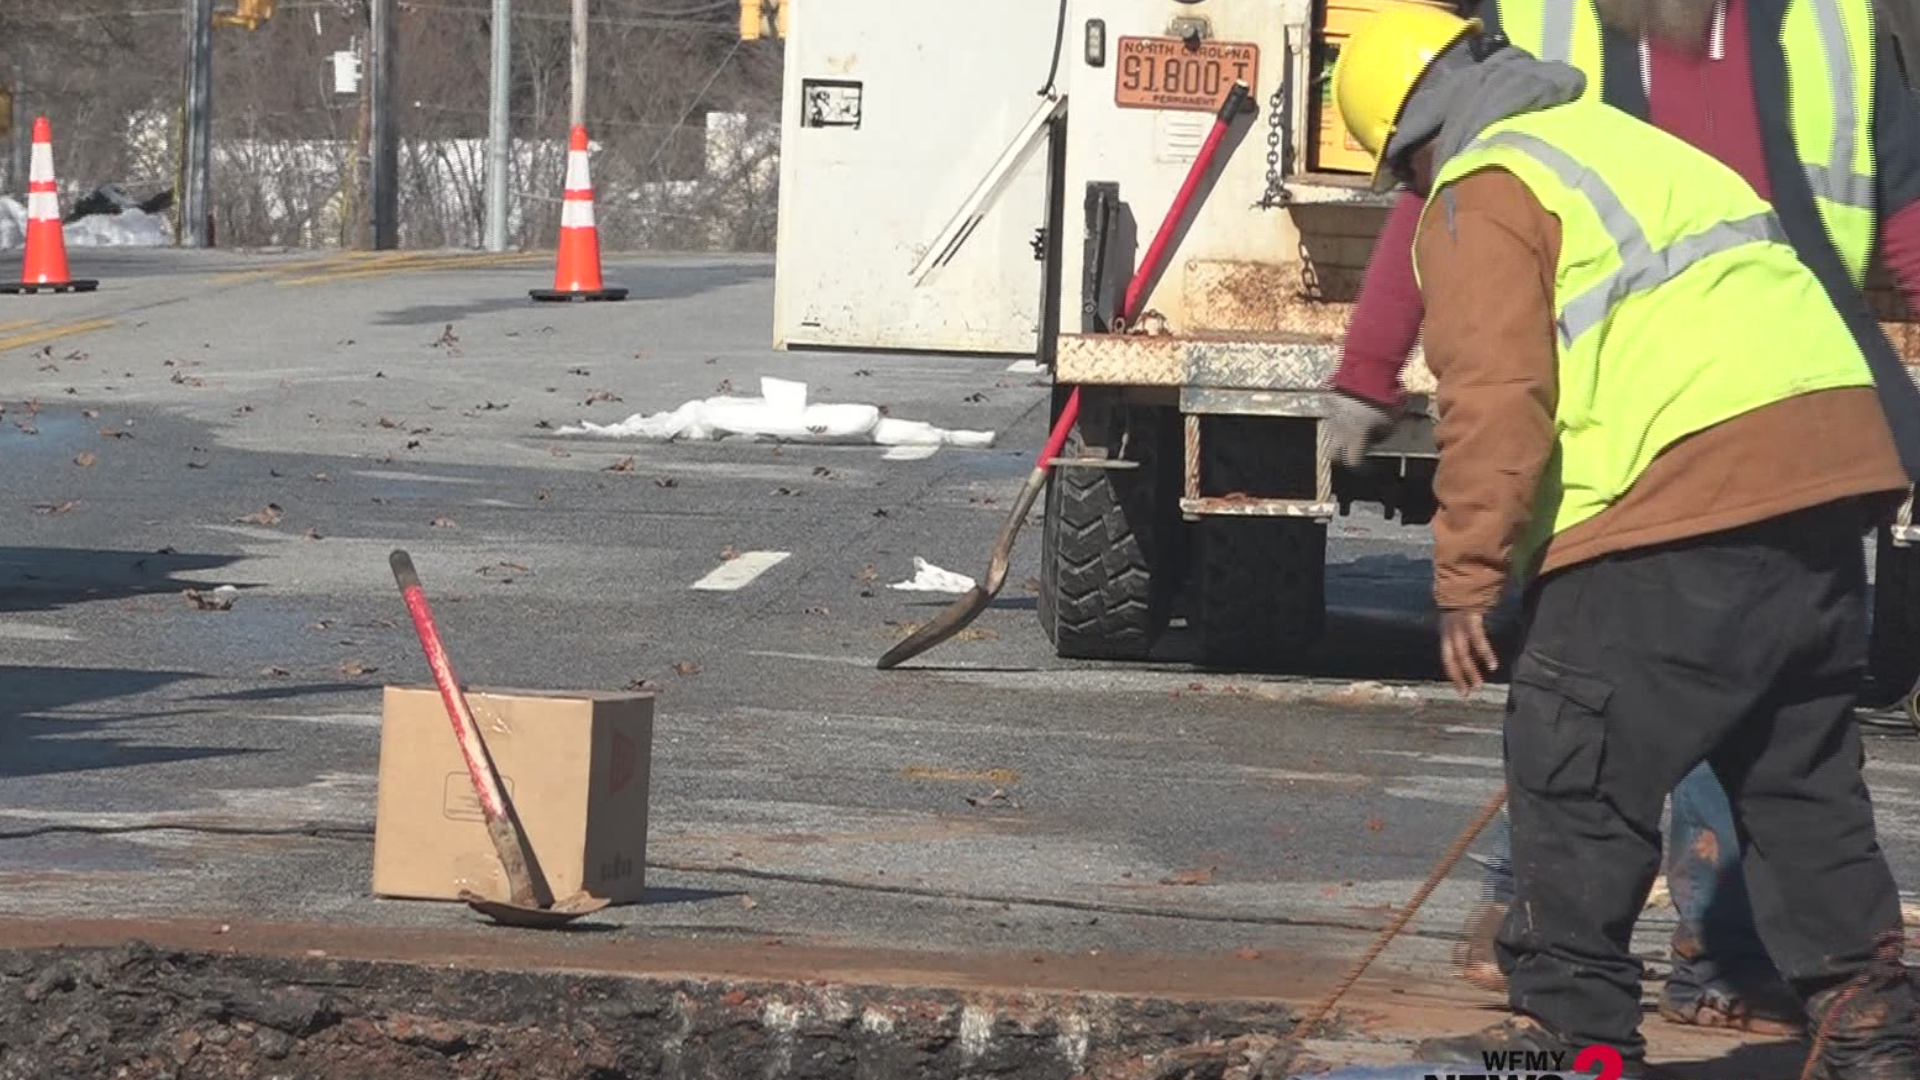 Crews closed New Garden Road between Ballinger Road and W. Friendly Ave due to a water main break after the snow storm.